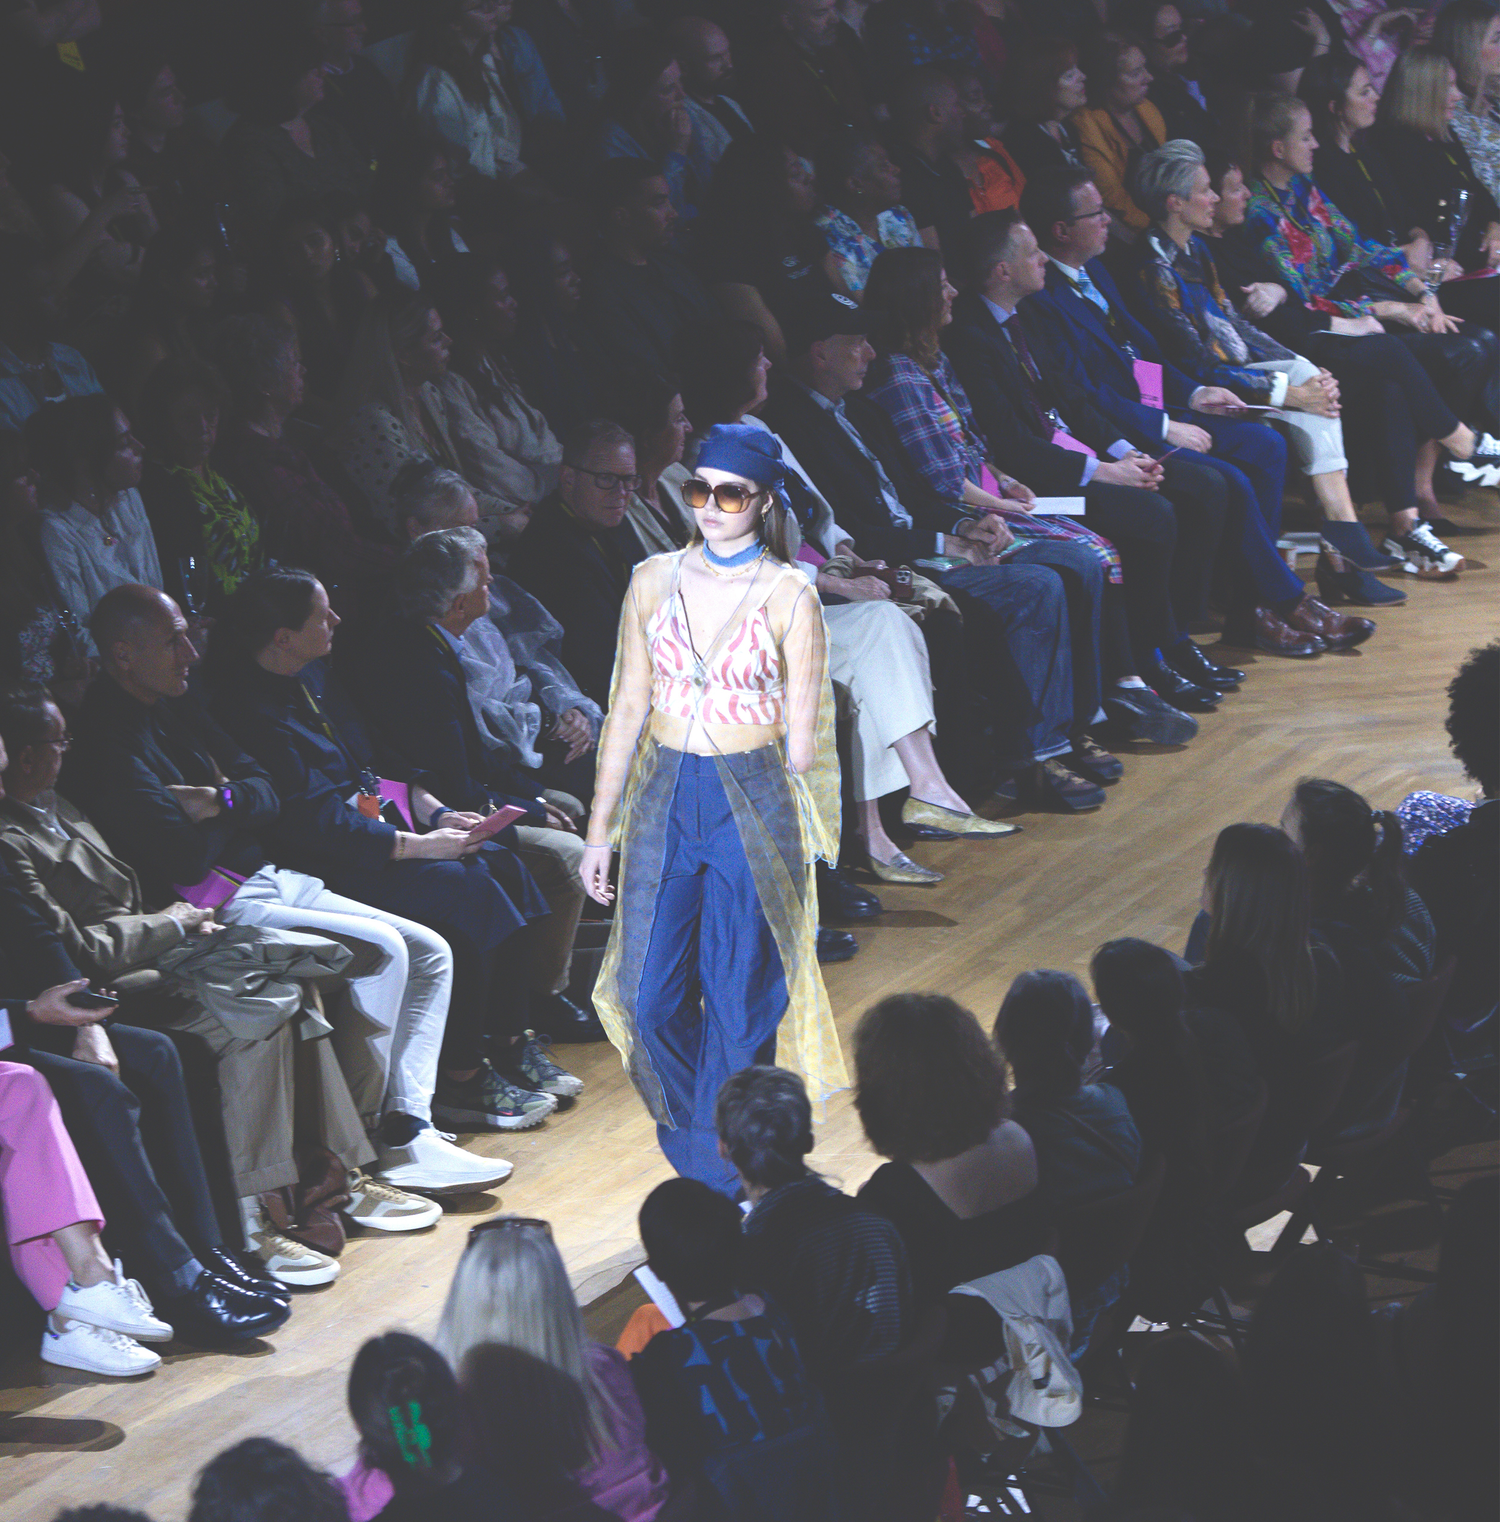 One model with a disability walking the runway in a full Recondition look.